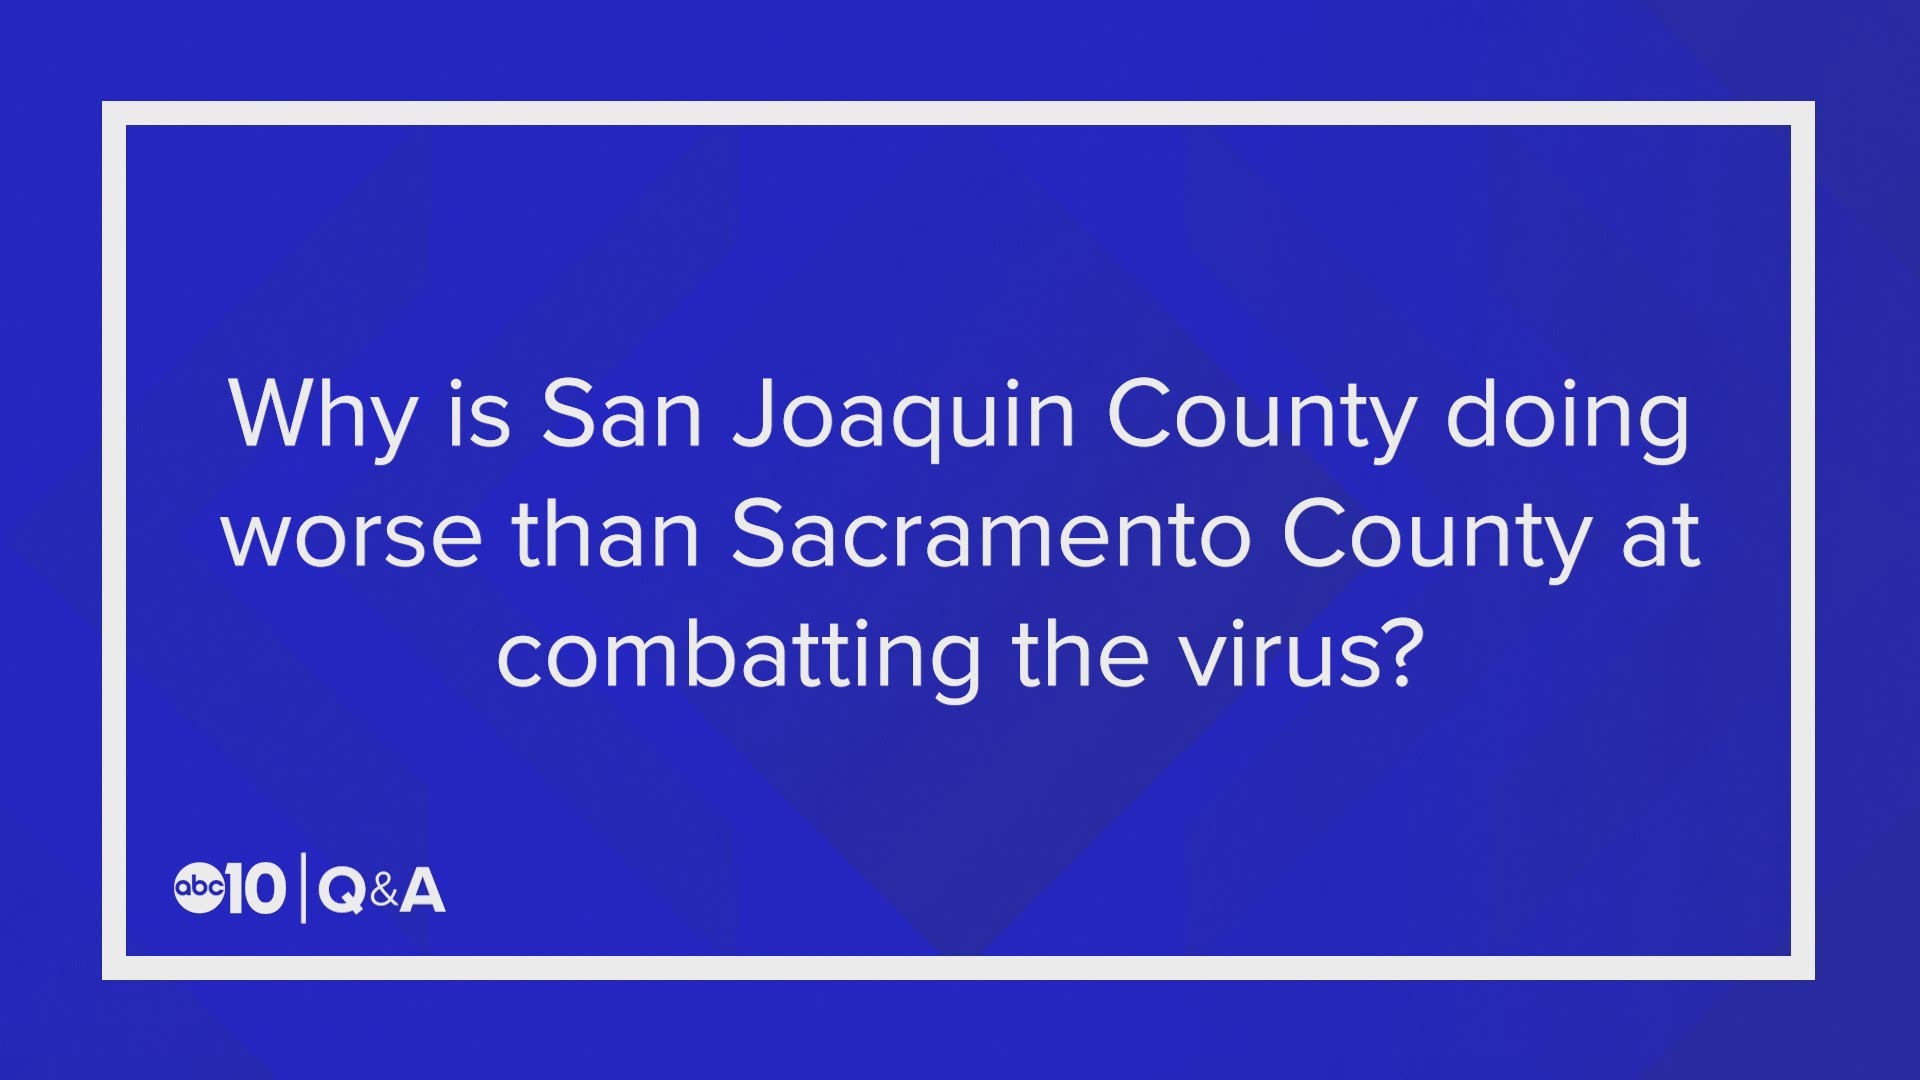 Dr. Park explains why San Joaquin County is doing worse than Sacramento and what she thinks needs to happen in the coming weeks to combat the spread of the virus.